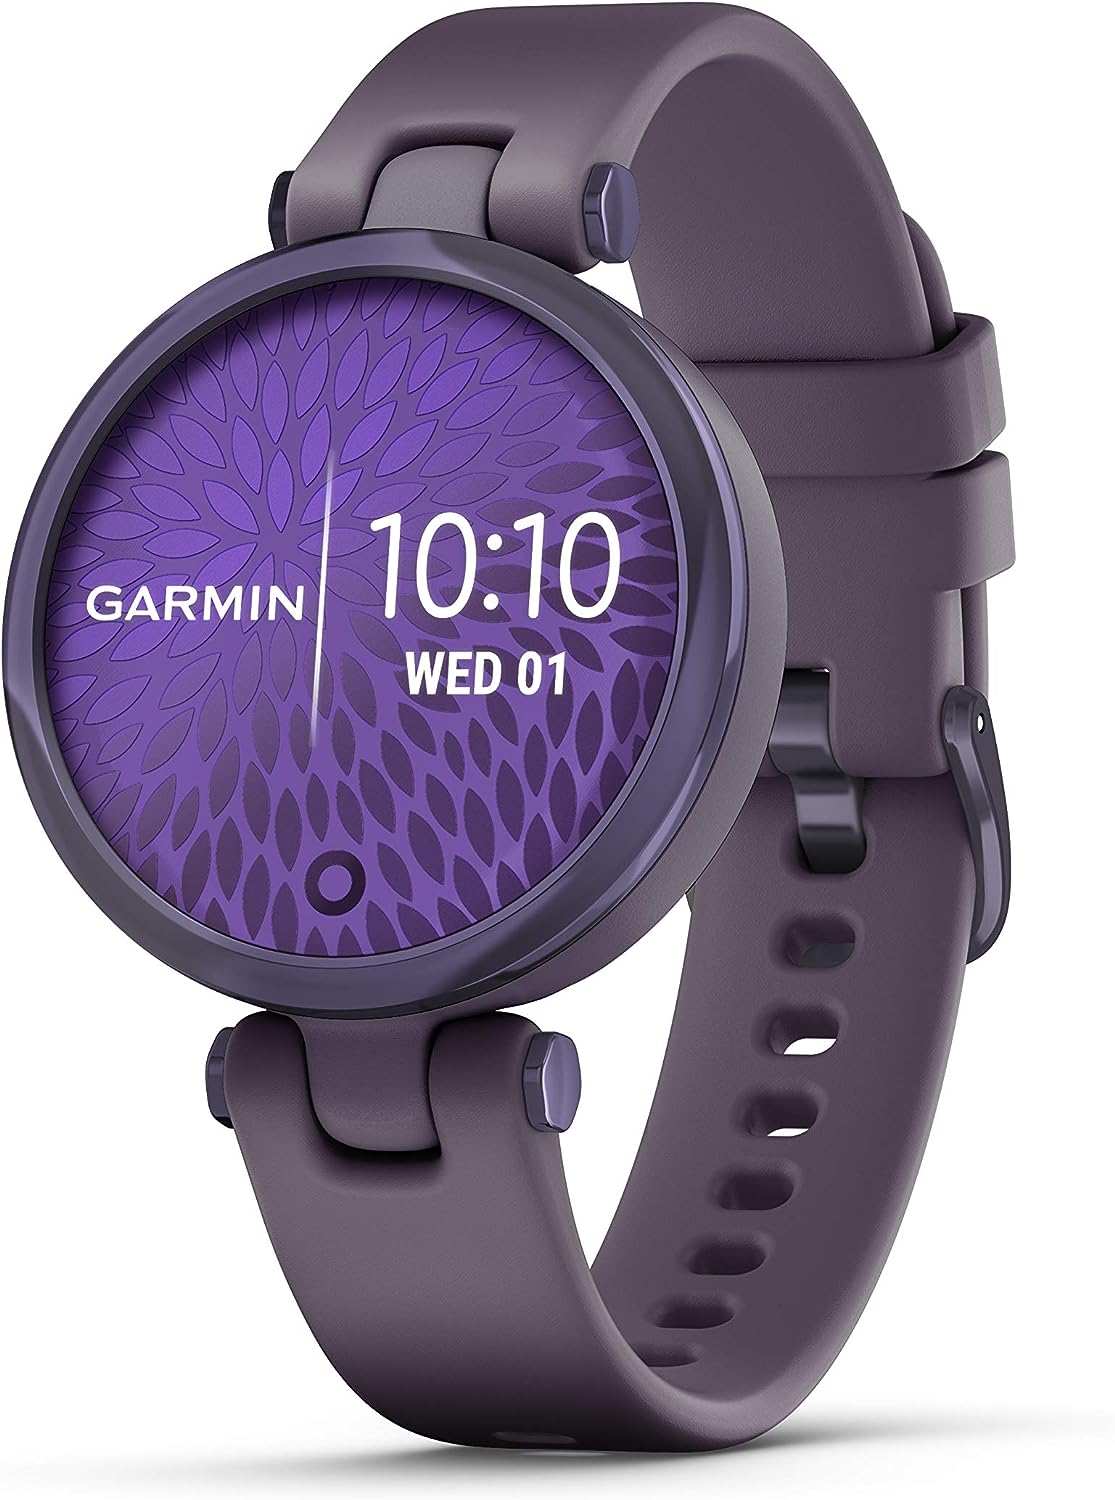 Garmin Lily™, Small Smartwatch with Touchscreen and Patterned Lens, Dark Purple , 1 inch